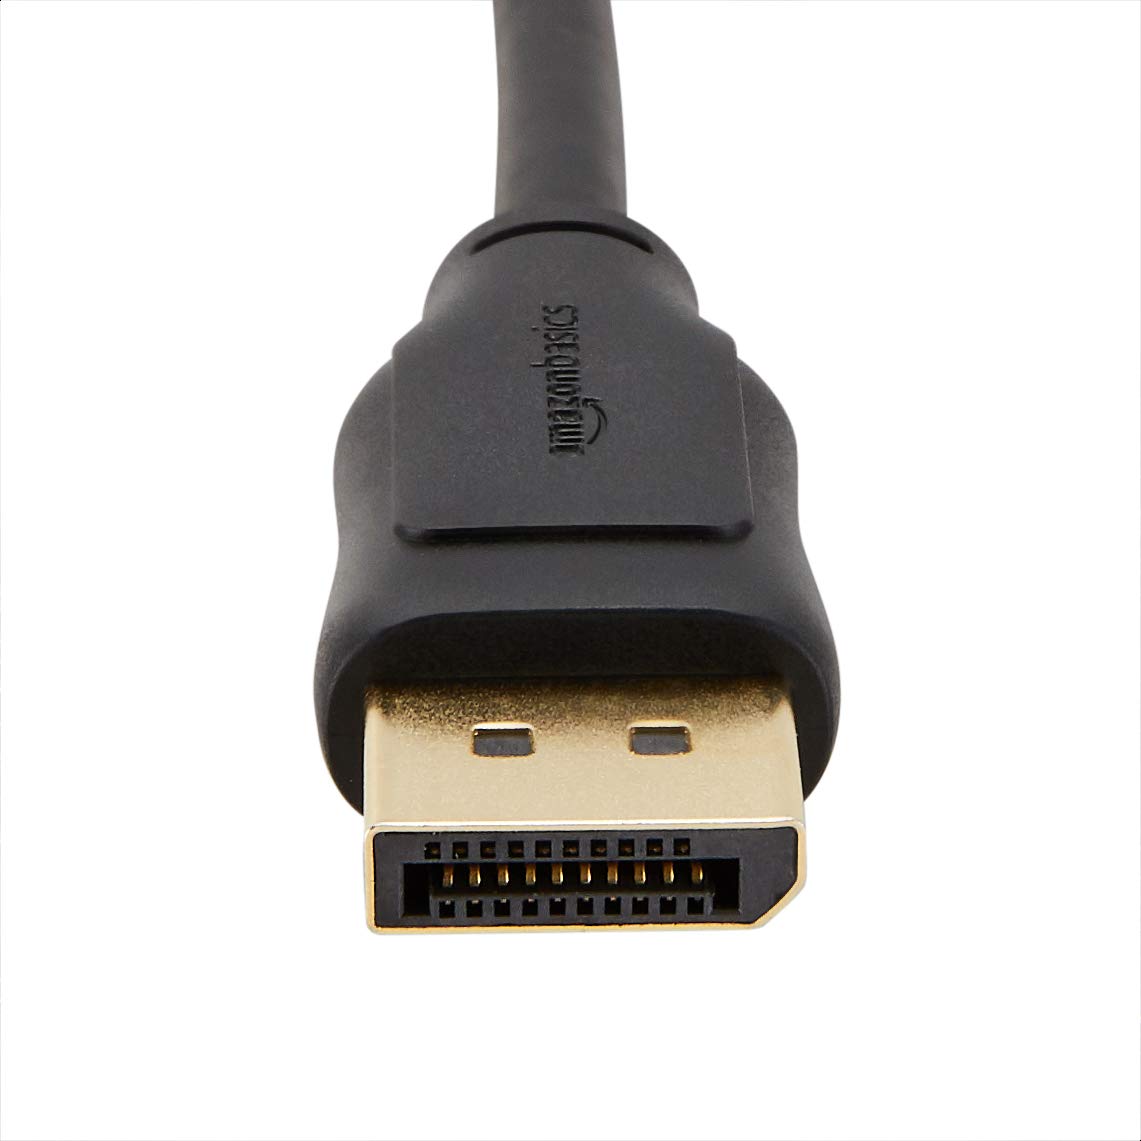 Amazon Basics DisplayPort 1.2 Cable, 21.6Gbps High-Speed, 4K@60Hz, 2K@165Hz, Gold-Plated Plugs, 6 Foot, Black